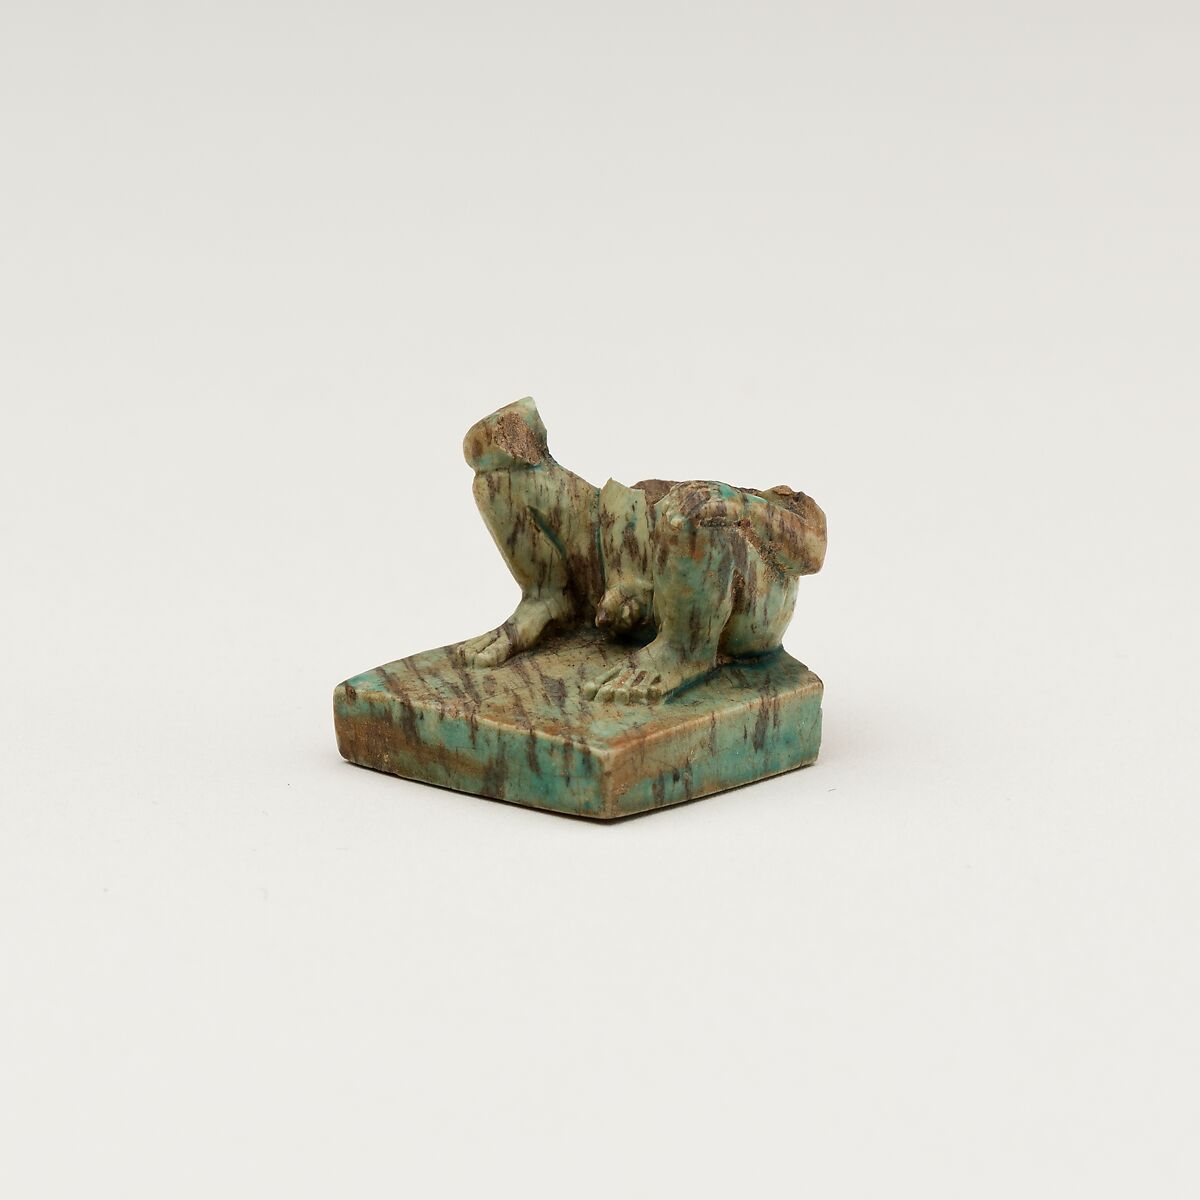 Stamp Seal in the Form of  a Squatting Child, Glazed steatite 